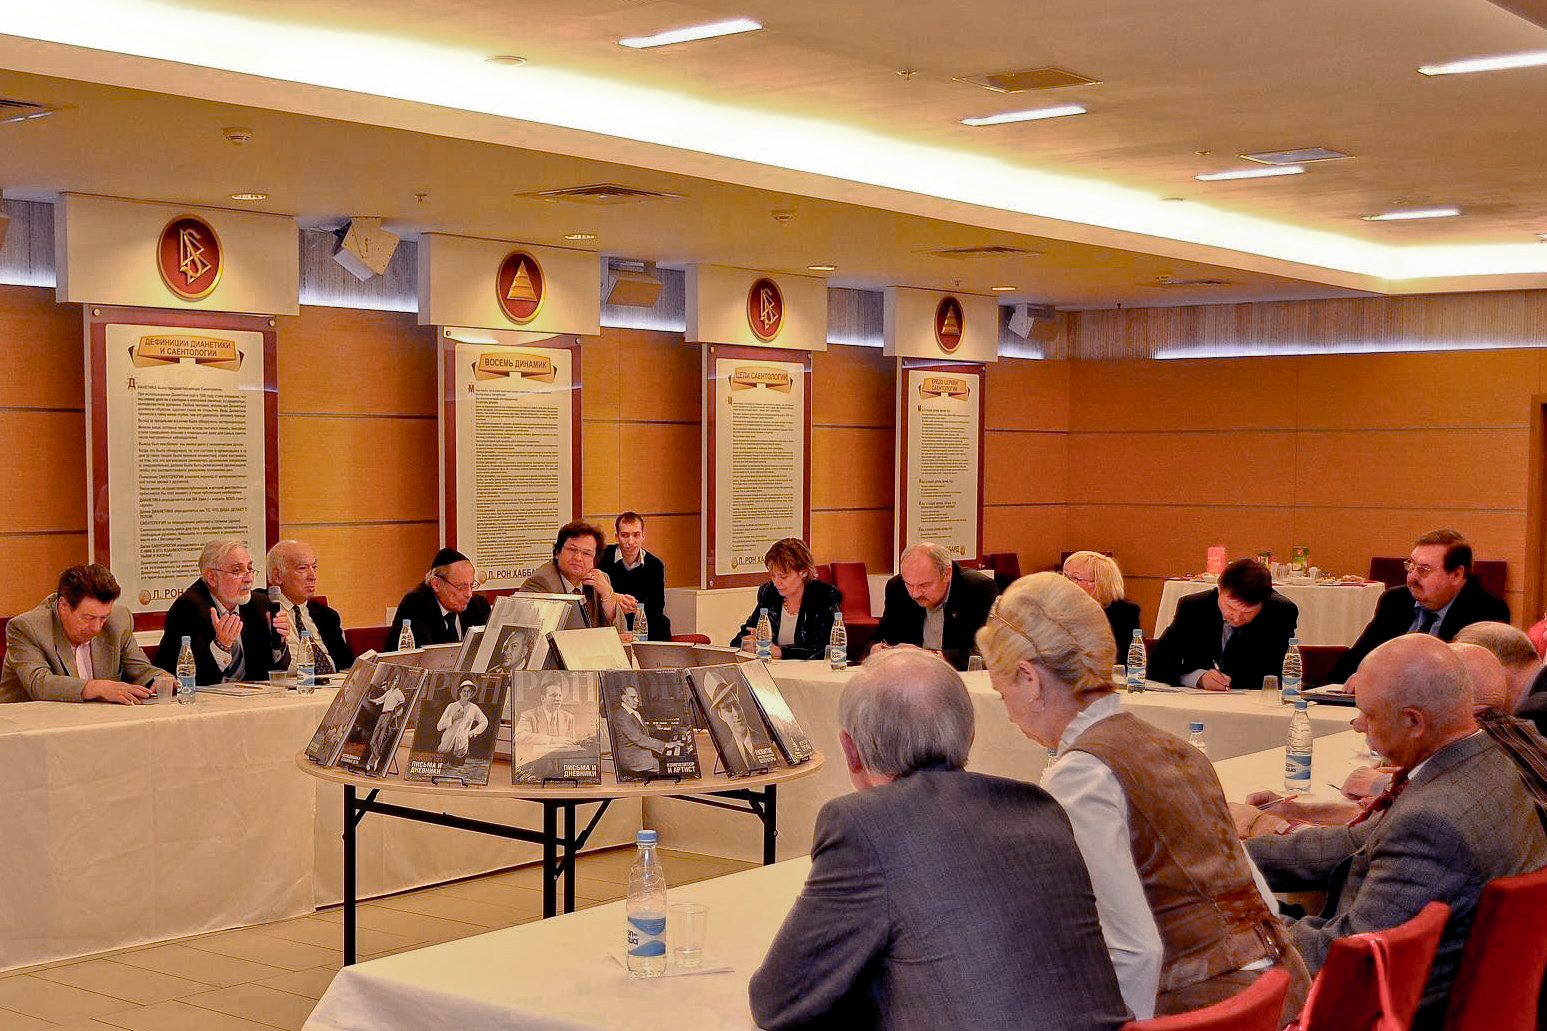 The Church of Scientology Moscow held a round table May 29 to introduce legislators, community and civic leaders to the L. Ron Hubbard biographical encyclopedia.